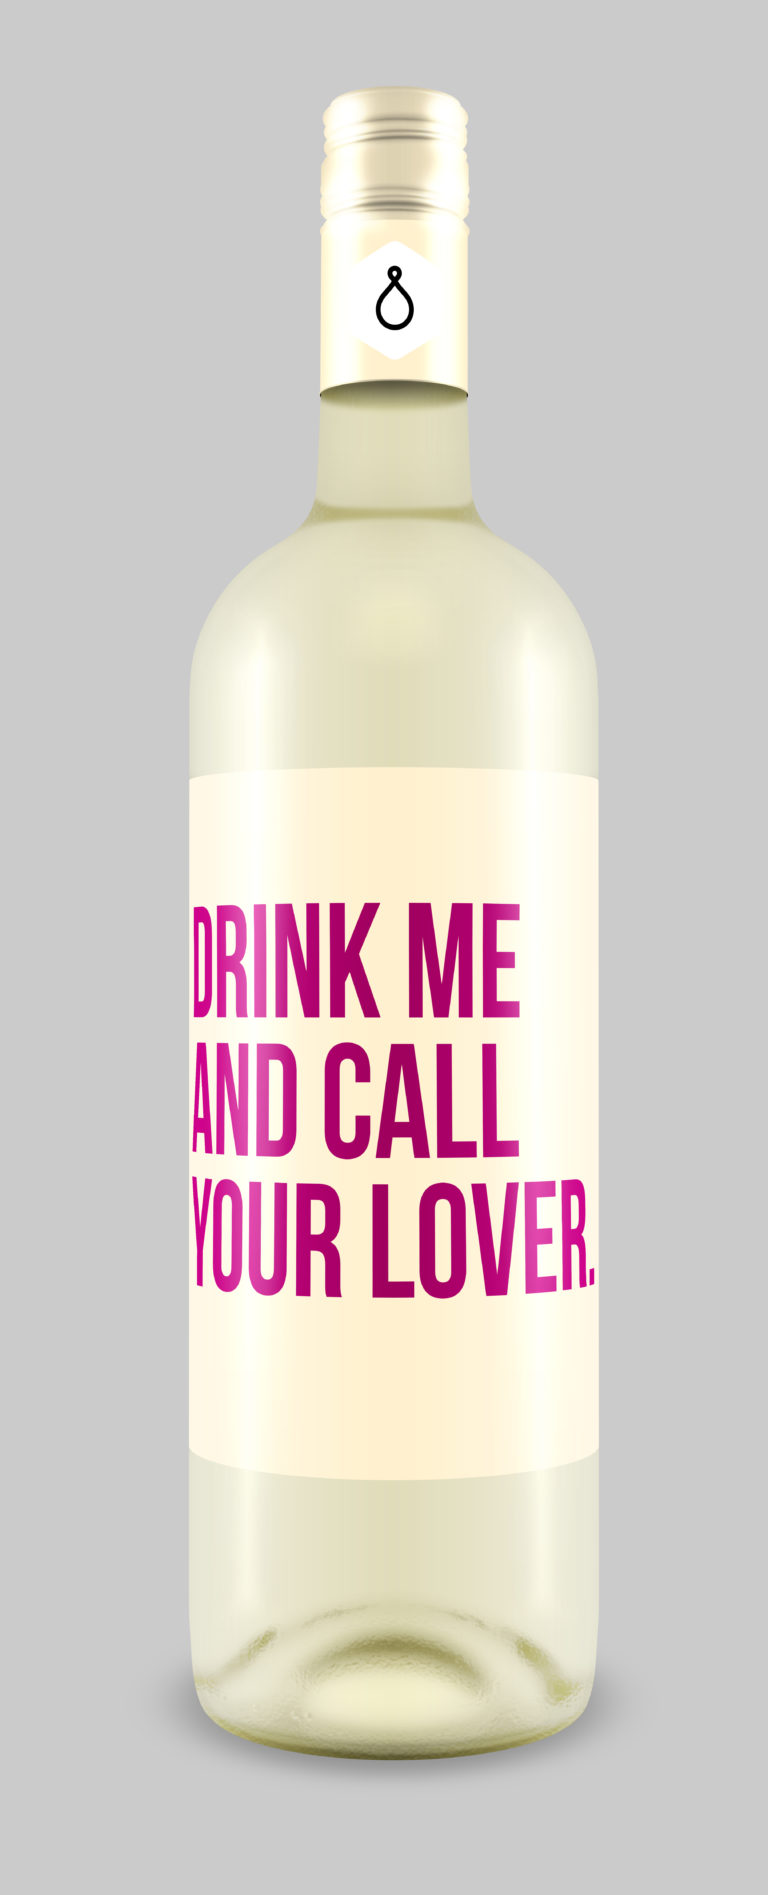 26 Wine Labels That Have No Time For Your Crap | VinePair